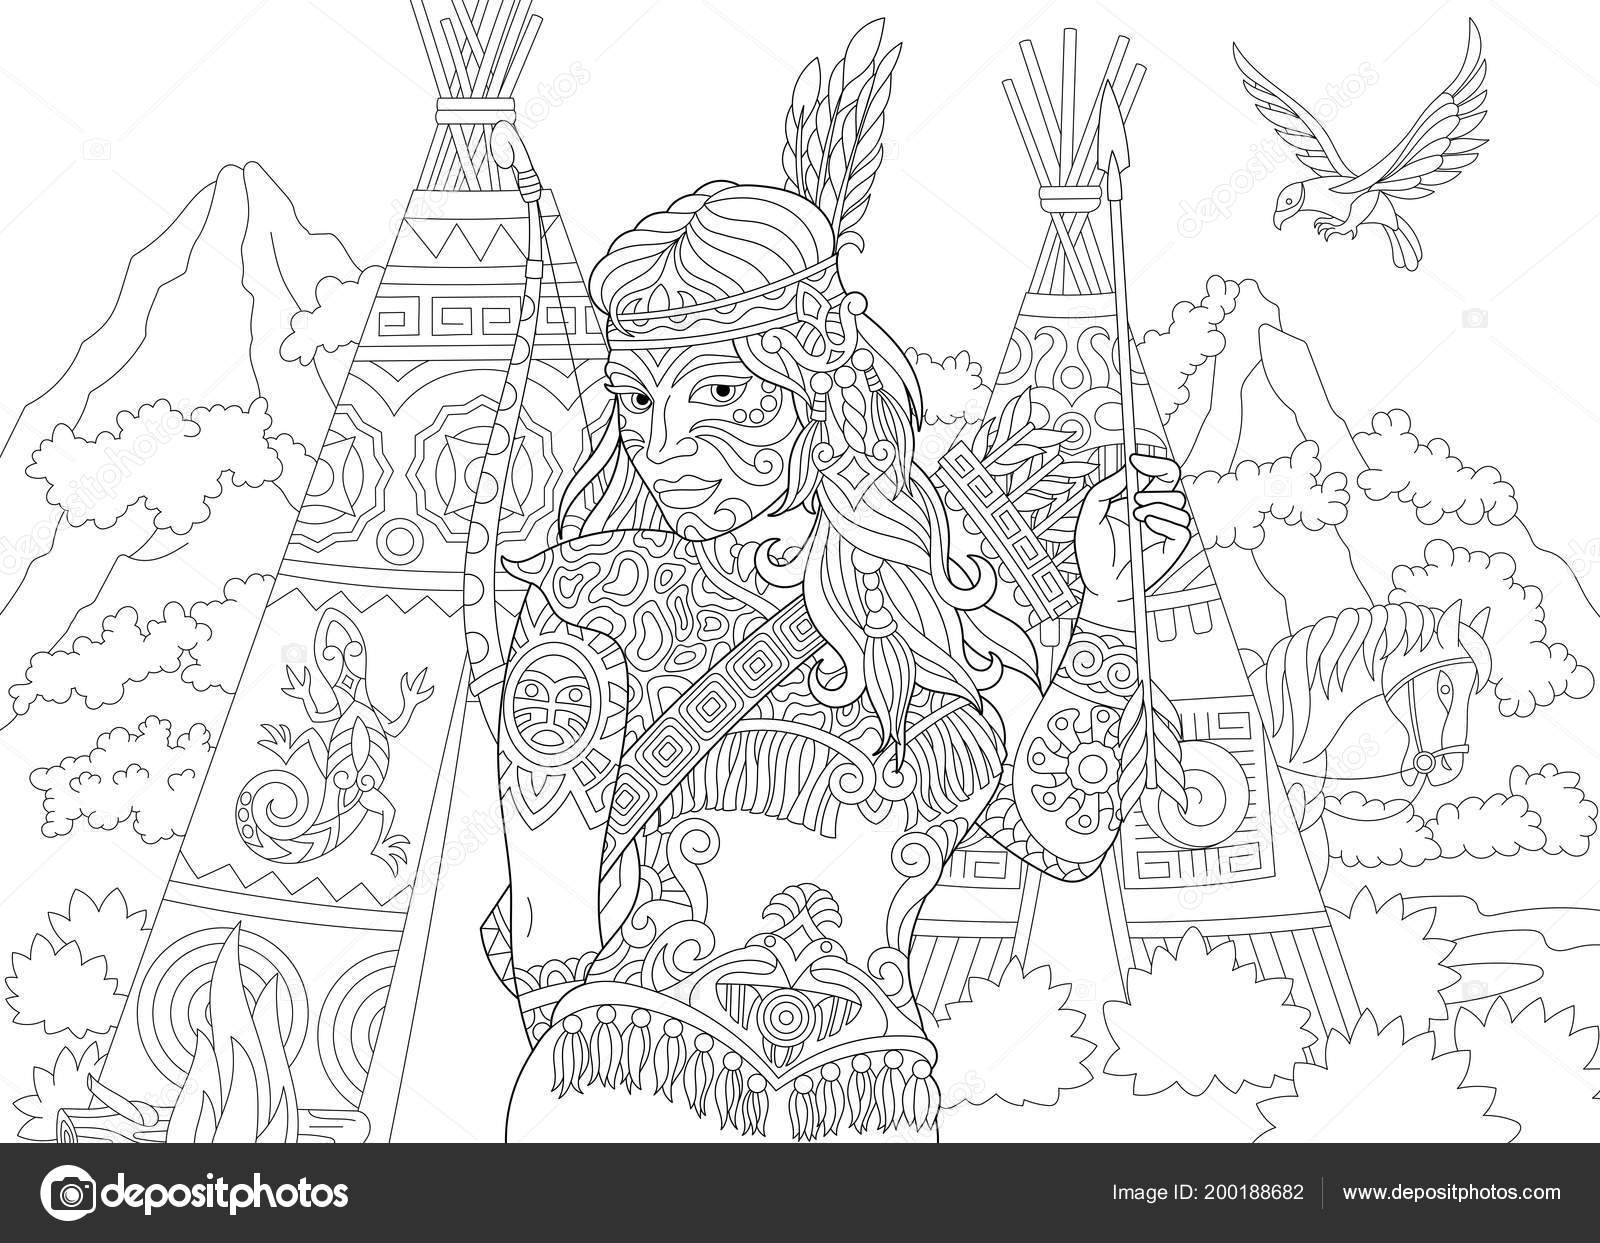 Native american indian apache woman coloring page colouring picture adult stock vector by sybirko